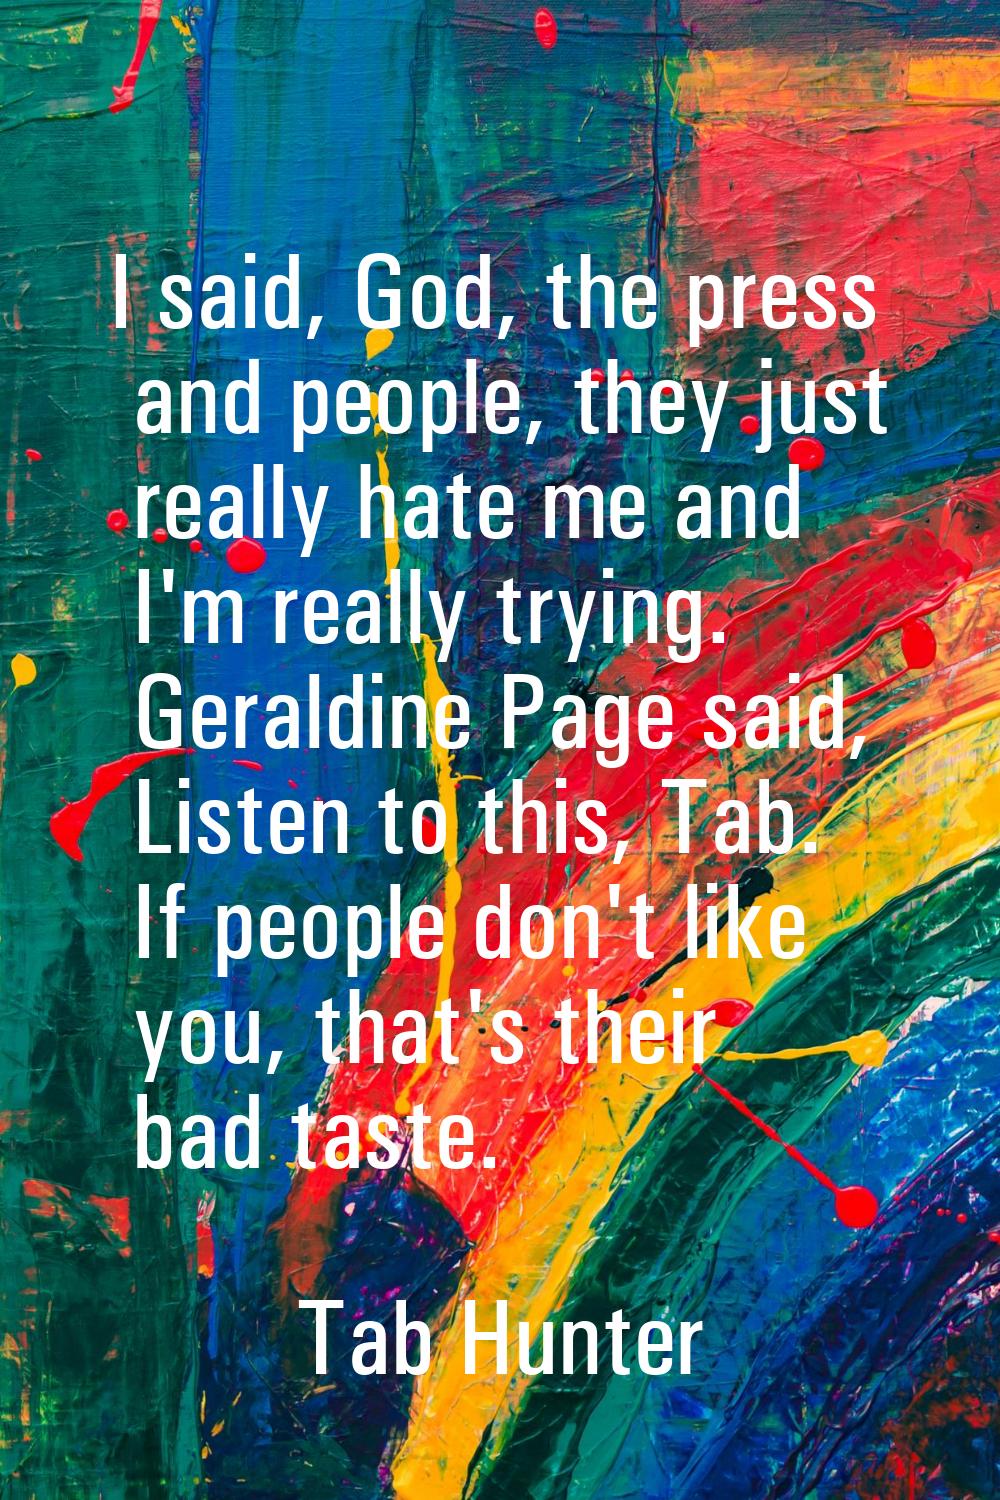 I said, God, the press and people, they just really hate me and I'm really trying. Geraldine Page s